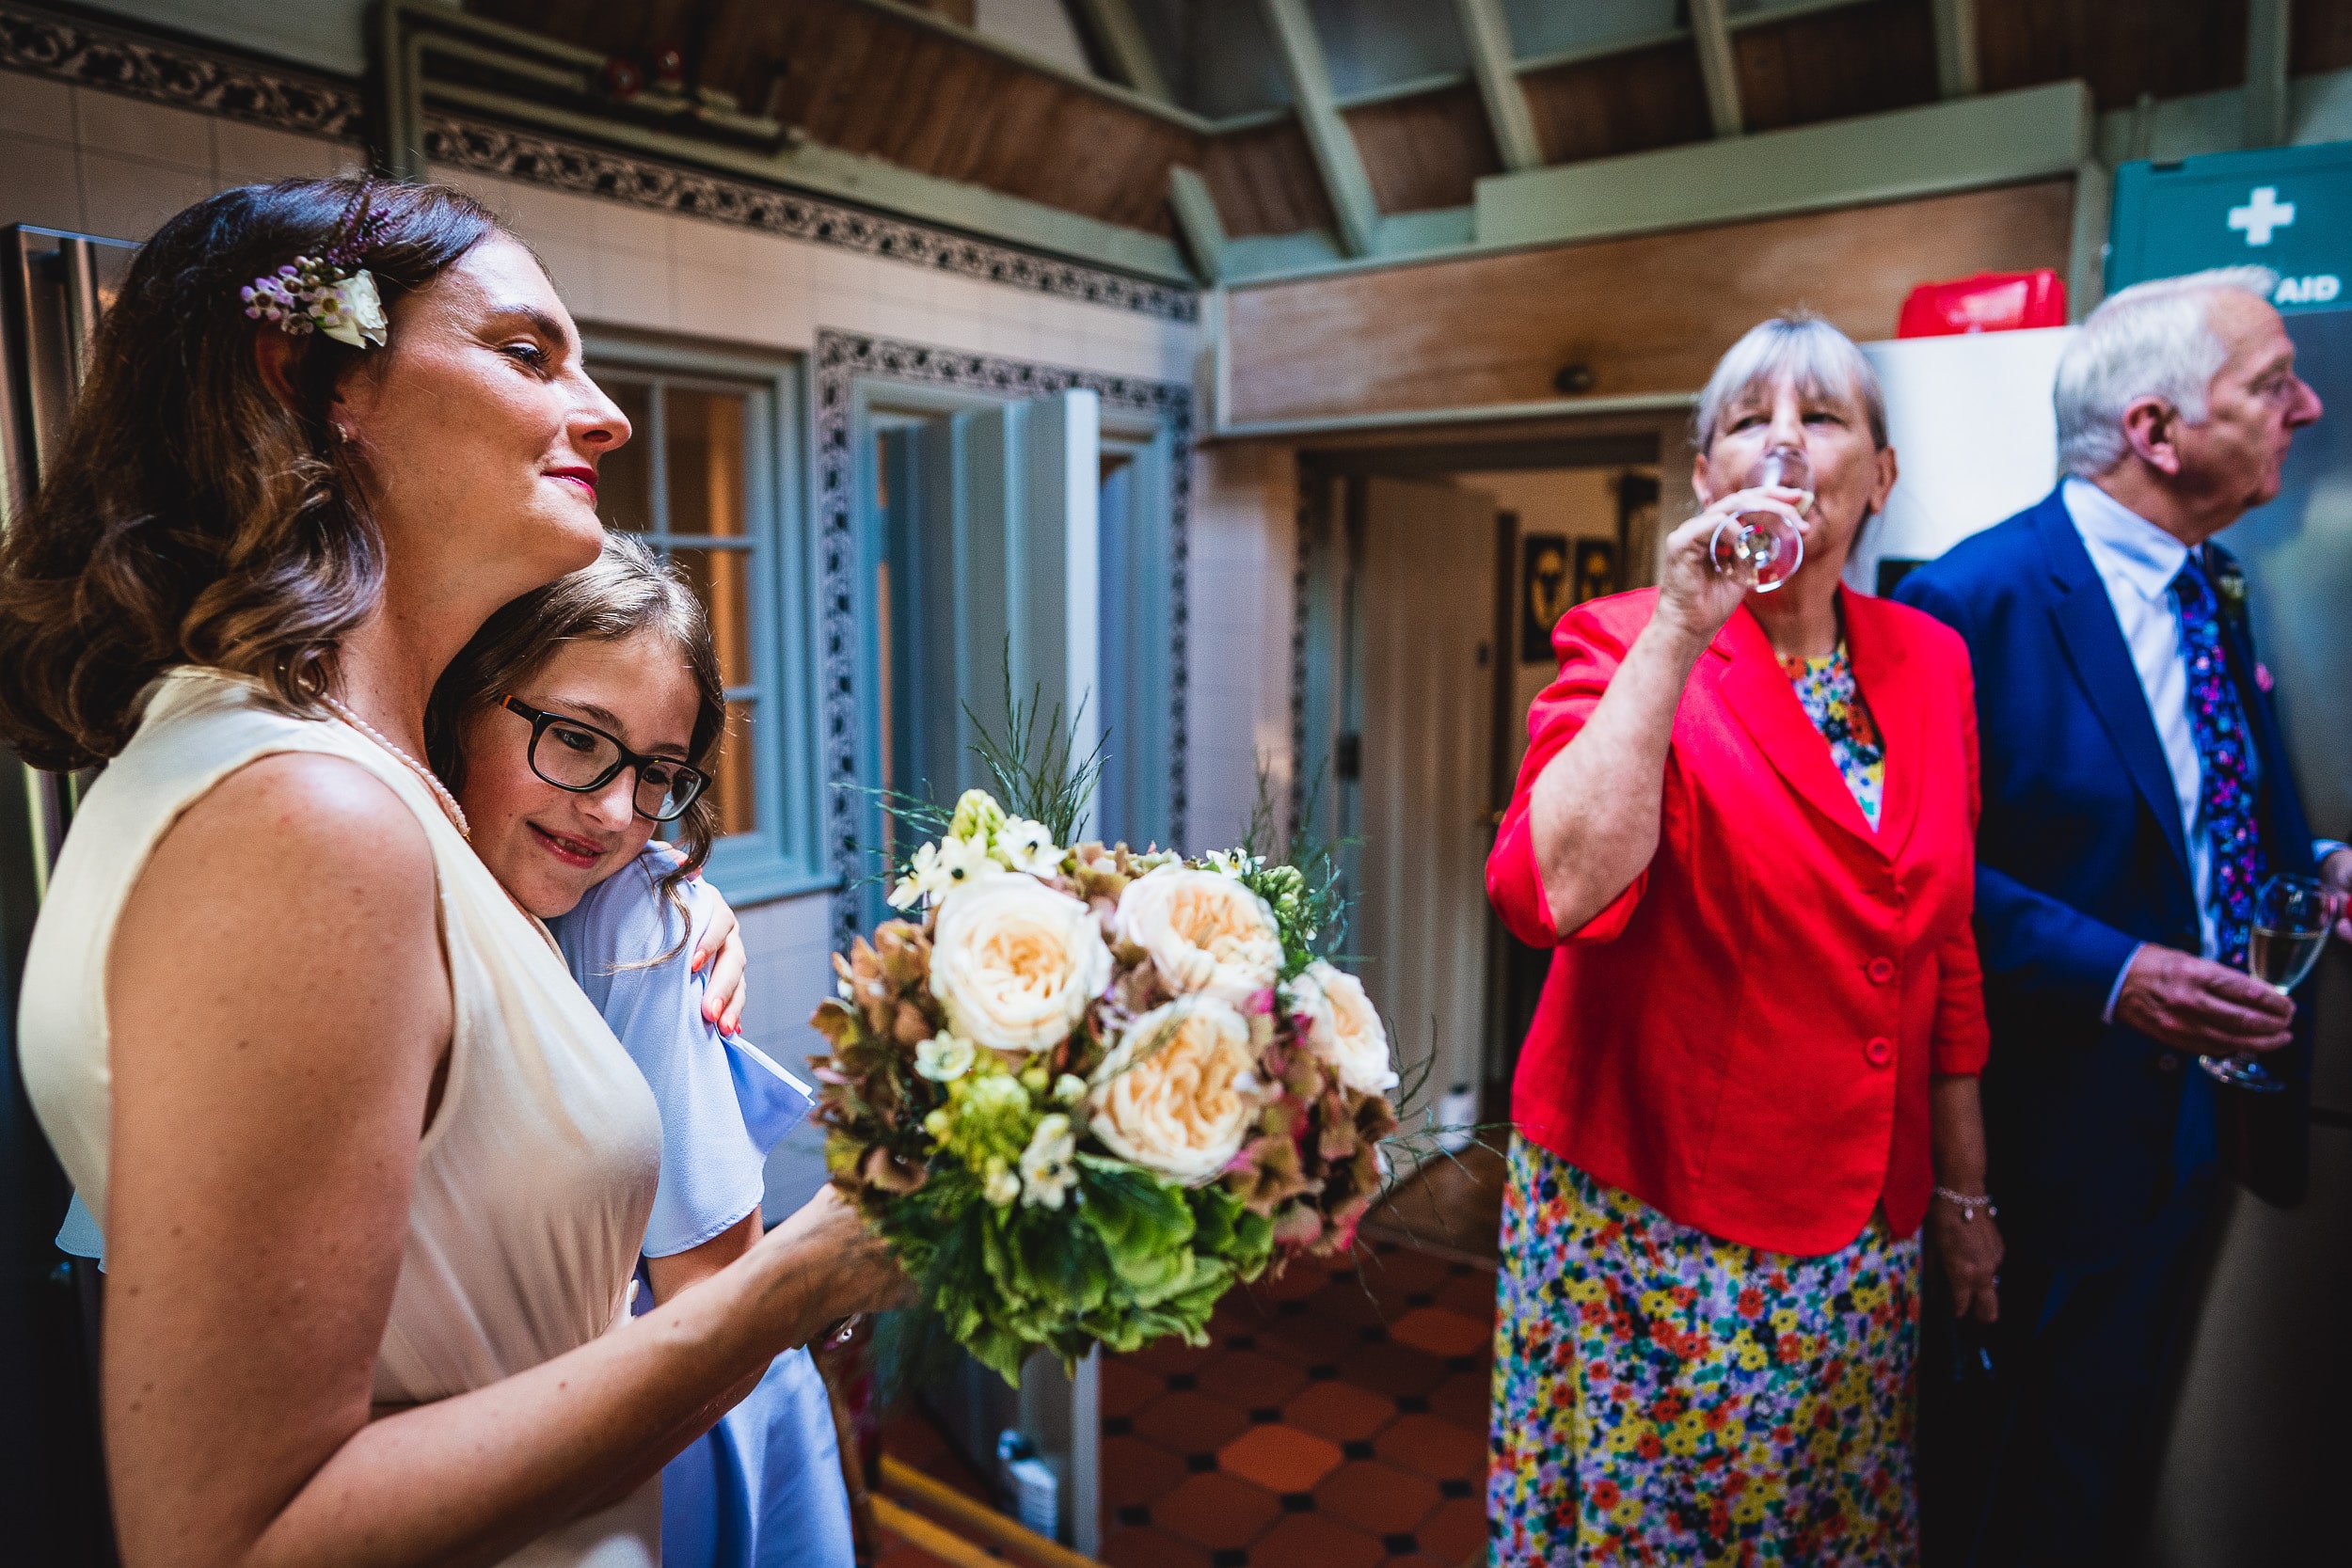 A Surrey Wedding couple with flowers in their hands at Ridge Farm.